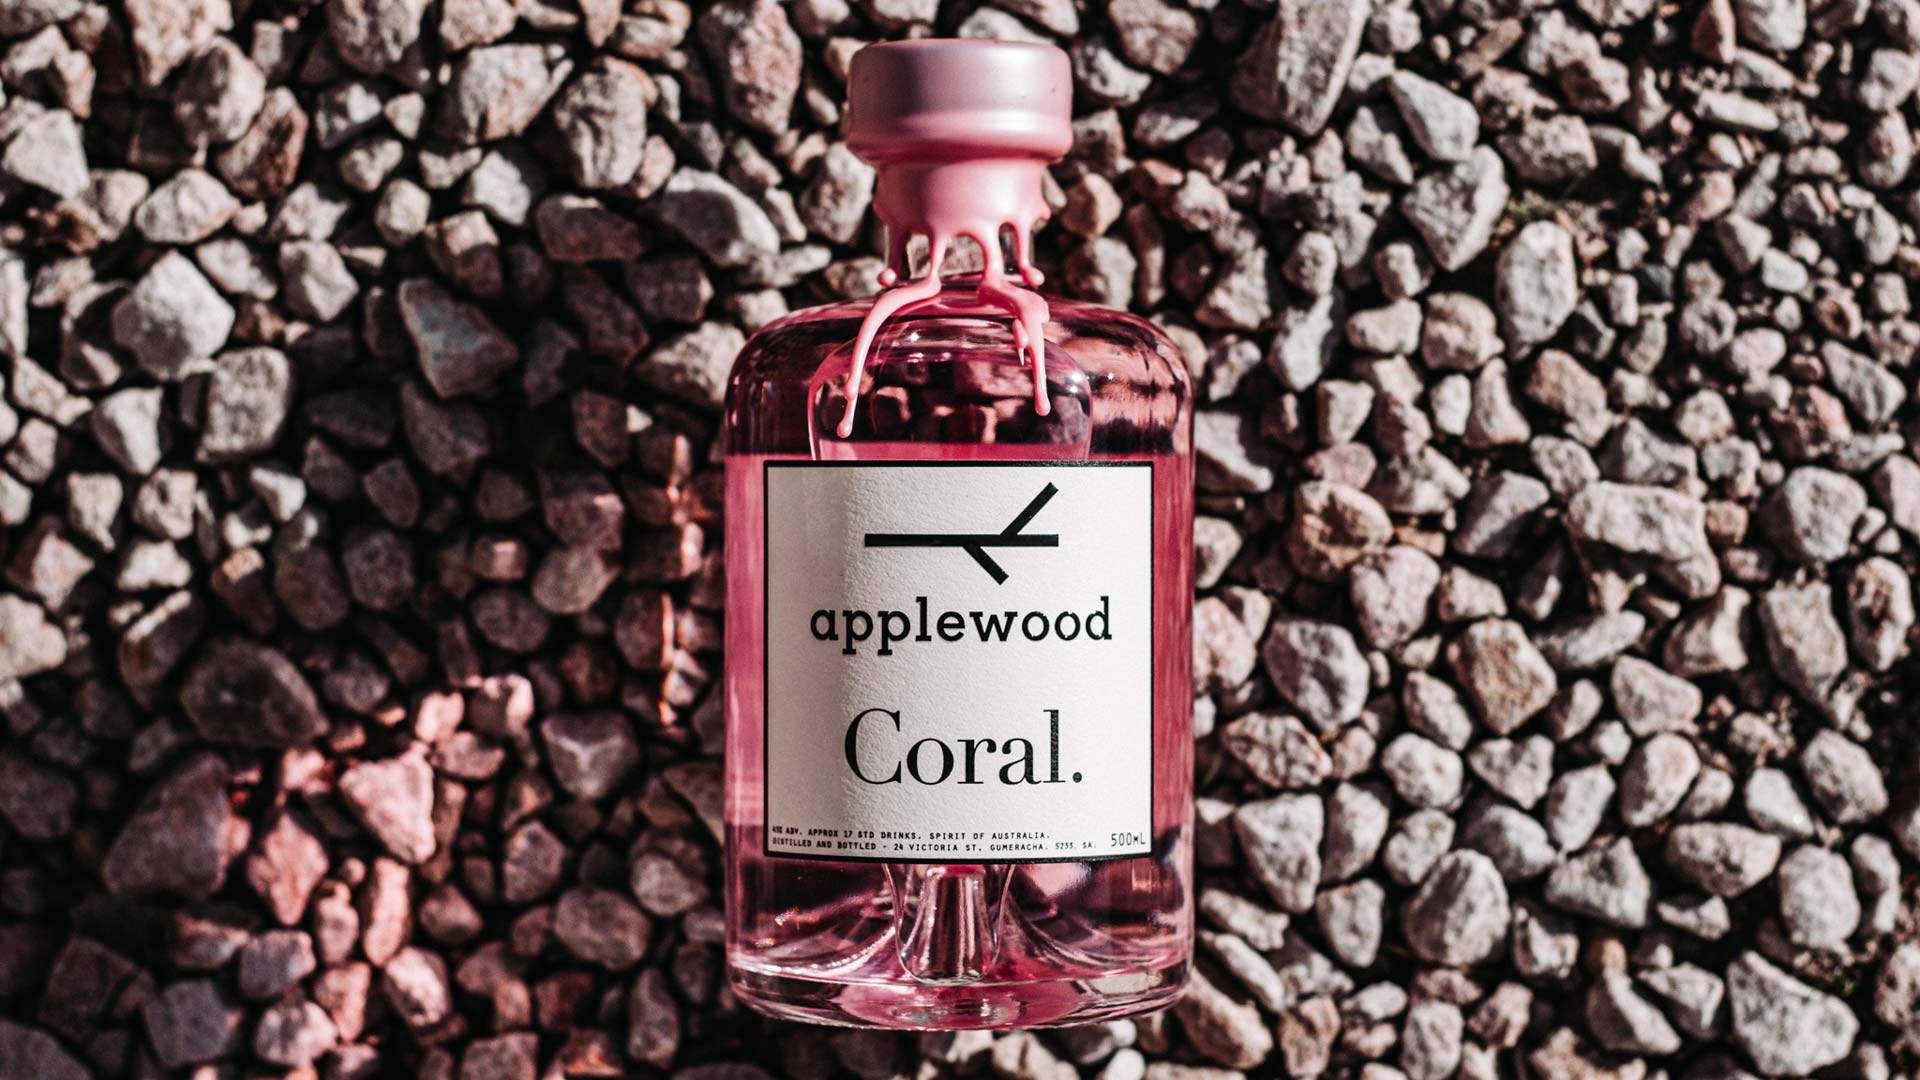 Applewood Distillery Has Just Released a New Coral Pink Gin Made with Native Australian Botanicals